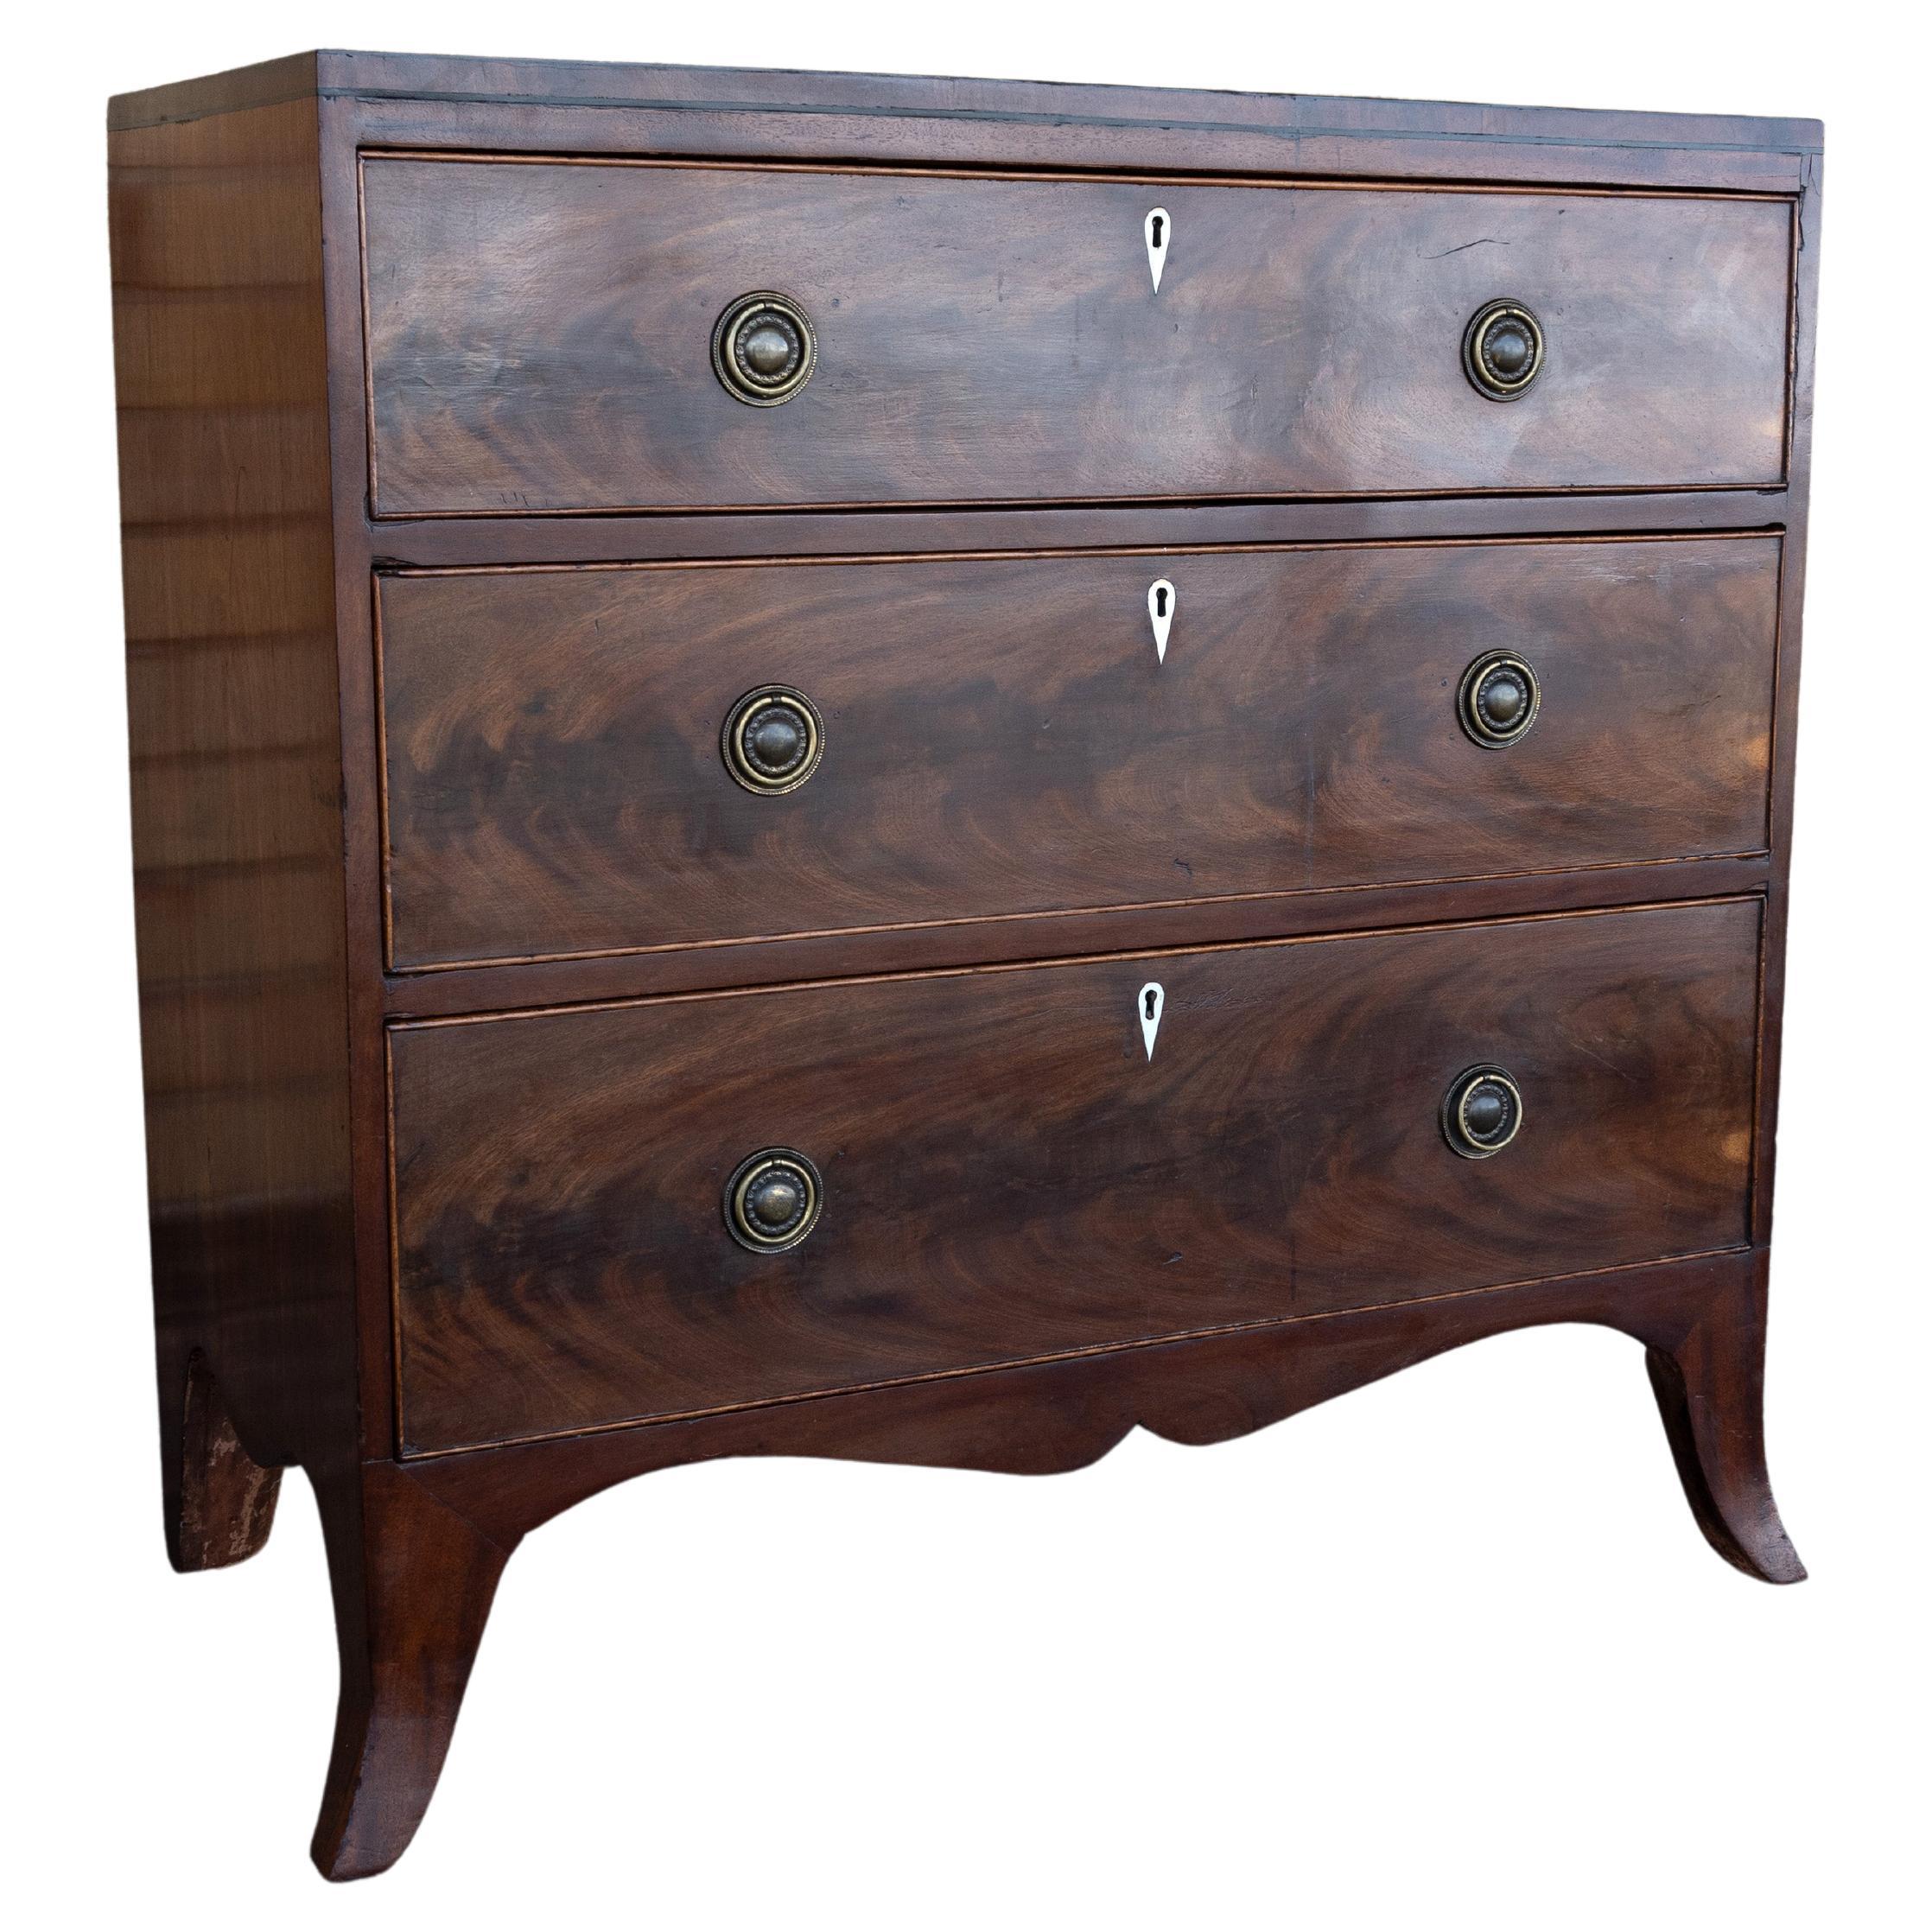 Antique English 19th Century Regency Diminutive Chest Of Drawers C.1810 For Sale 7